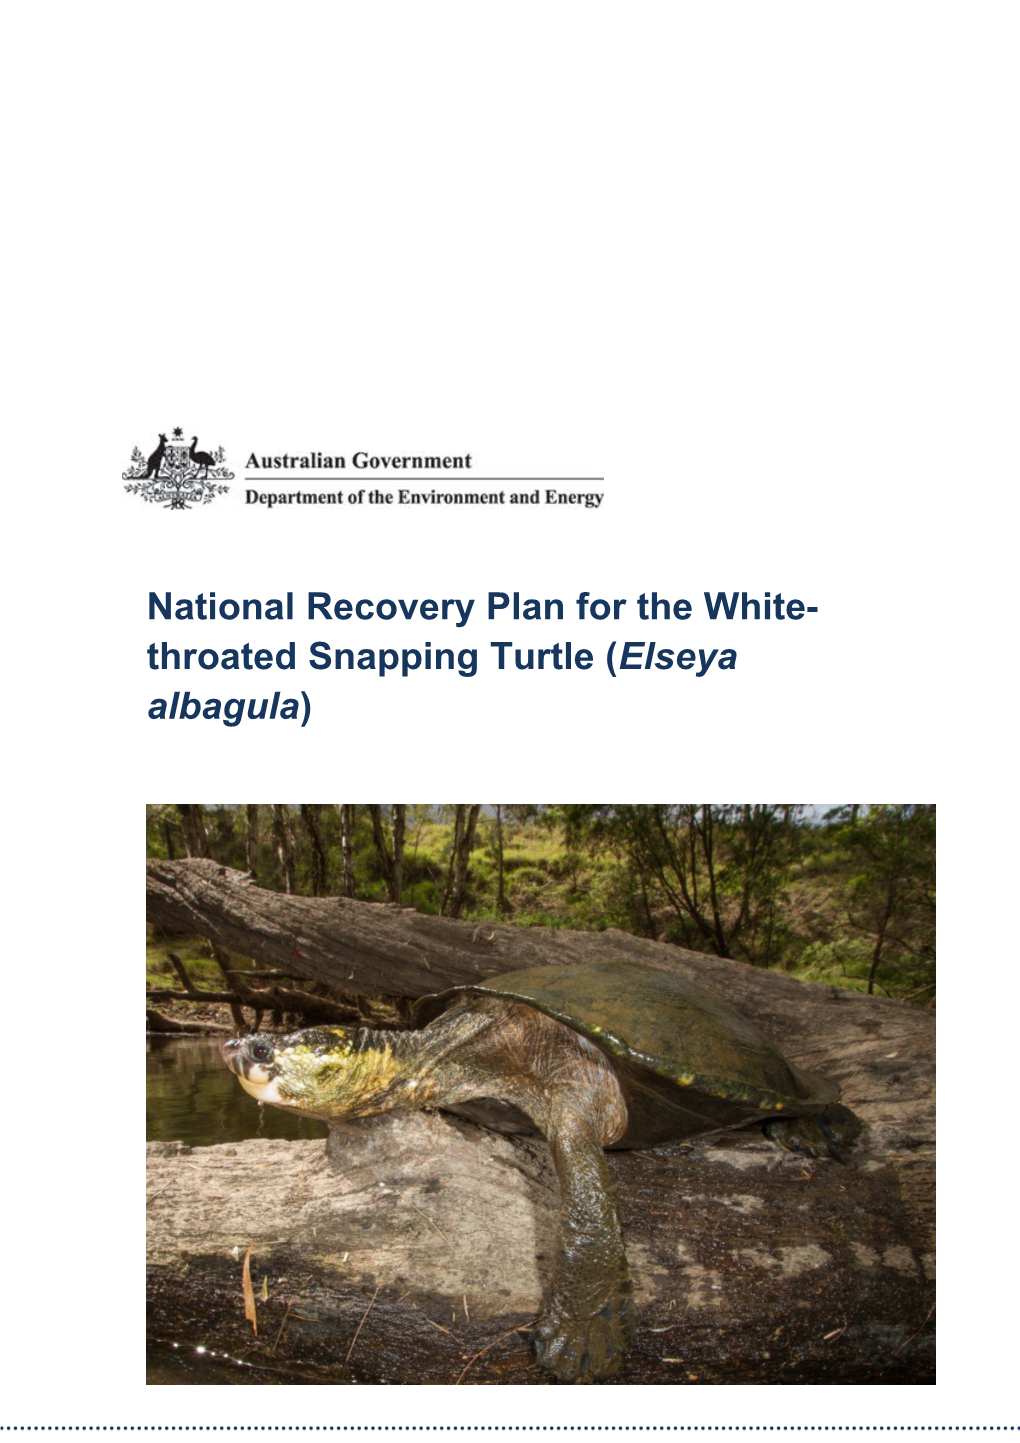 Draft National Recovery Plan for the White-Throated Snapping Turtle (Elseya Albagula)